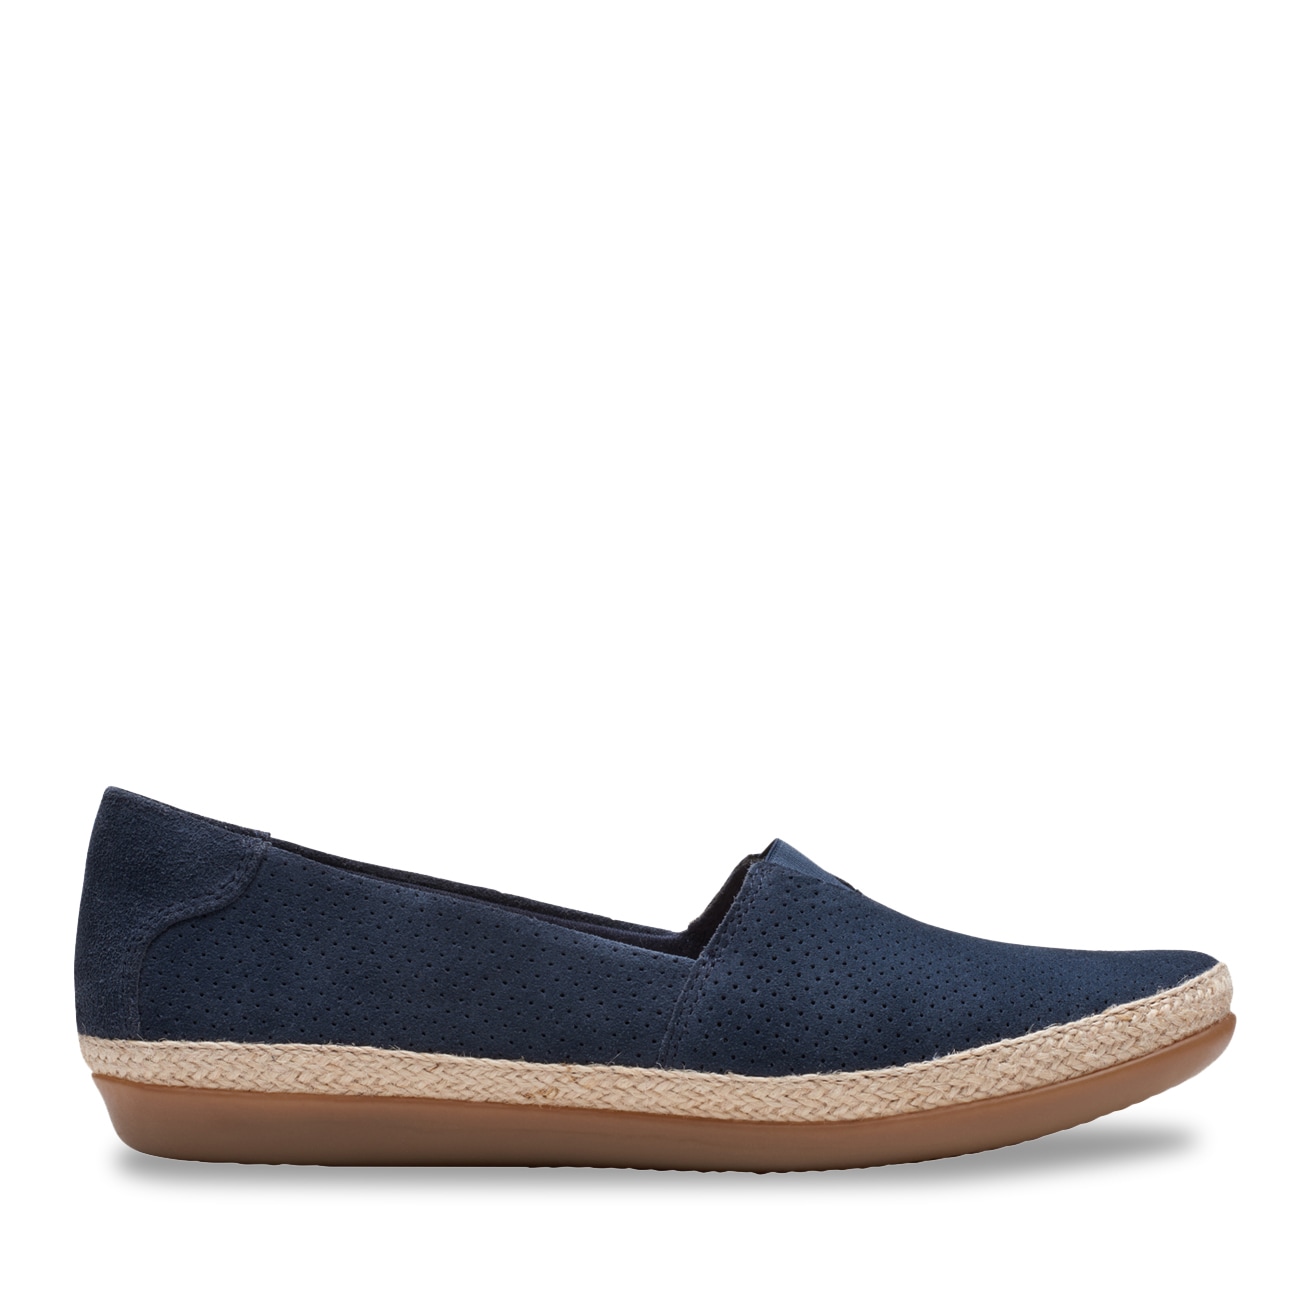 clarks canada online shopping